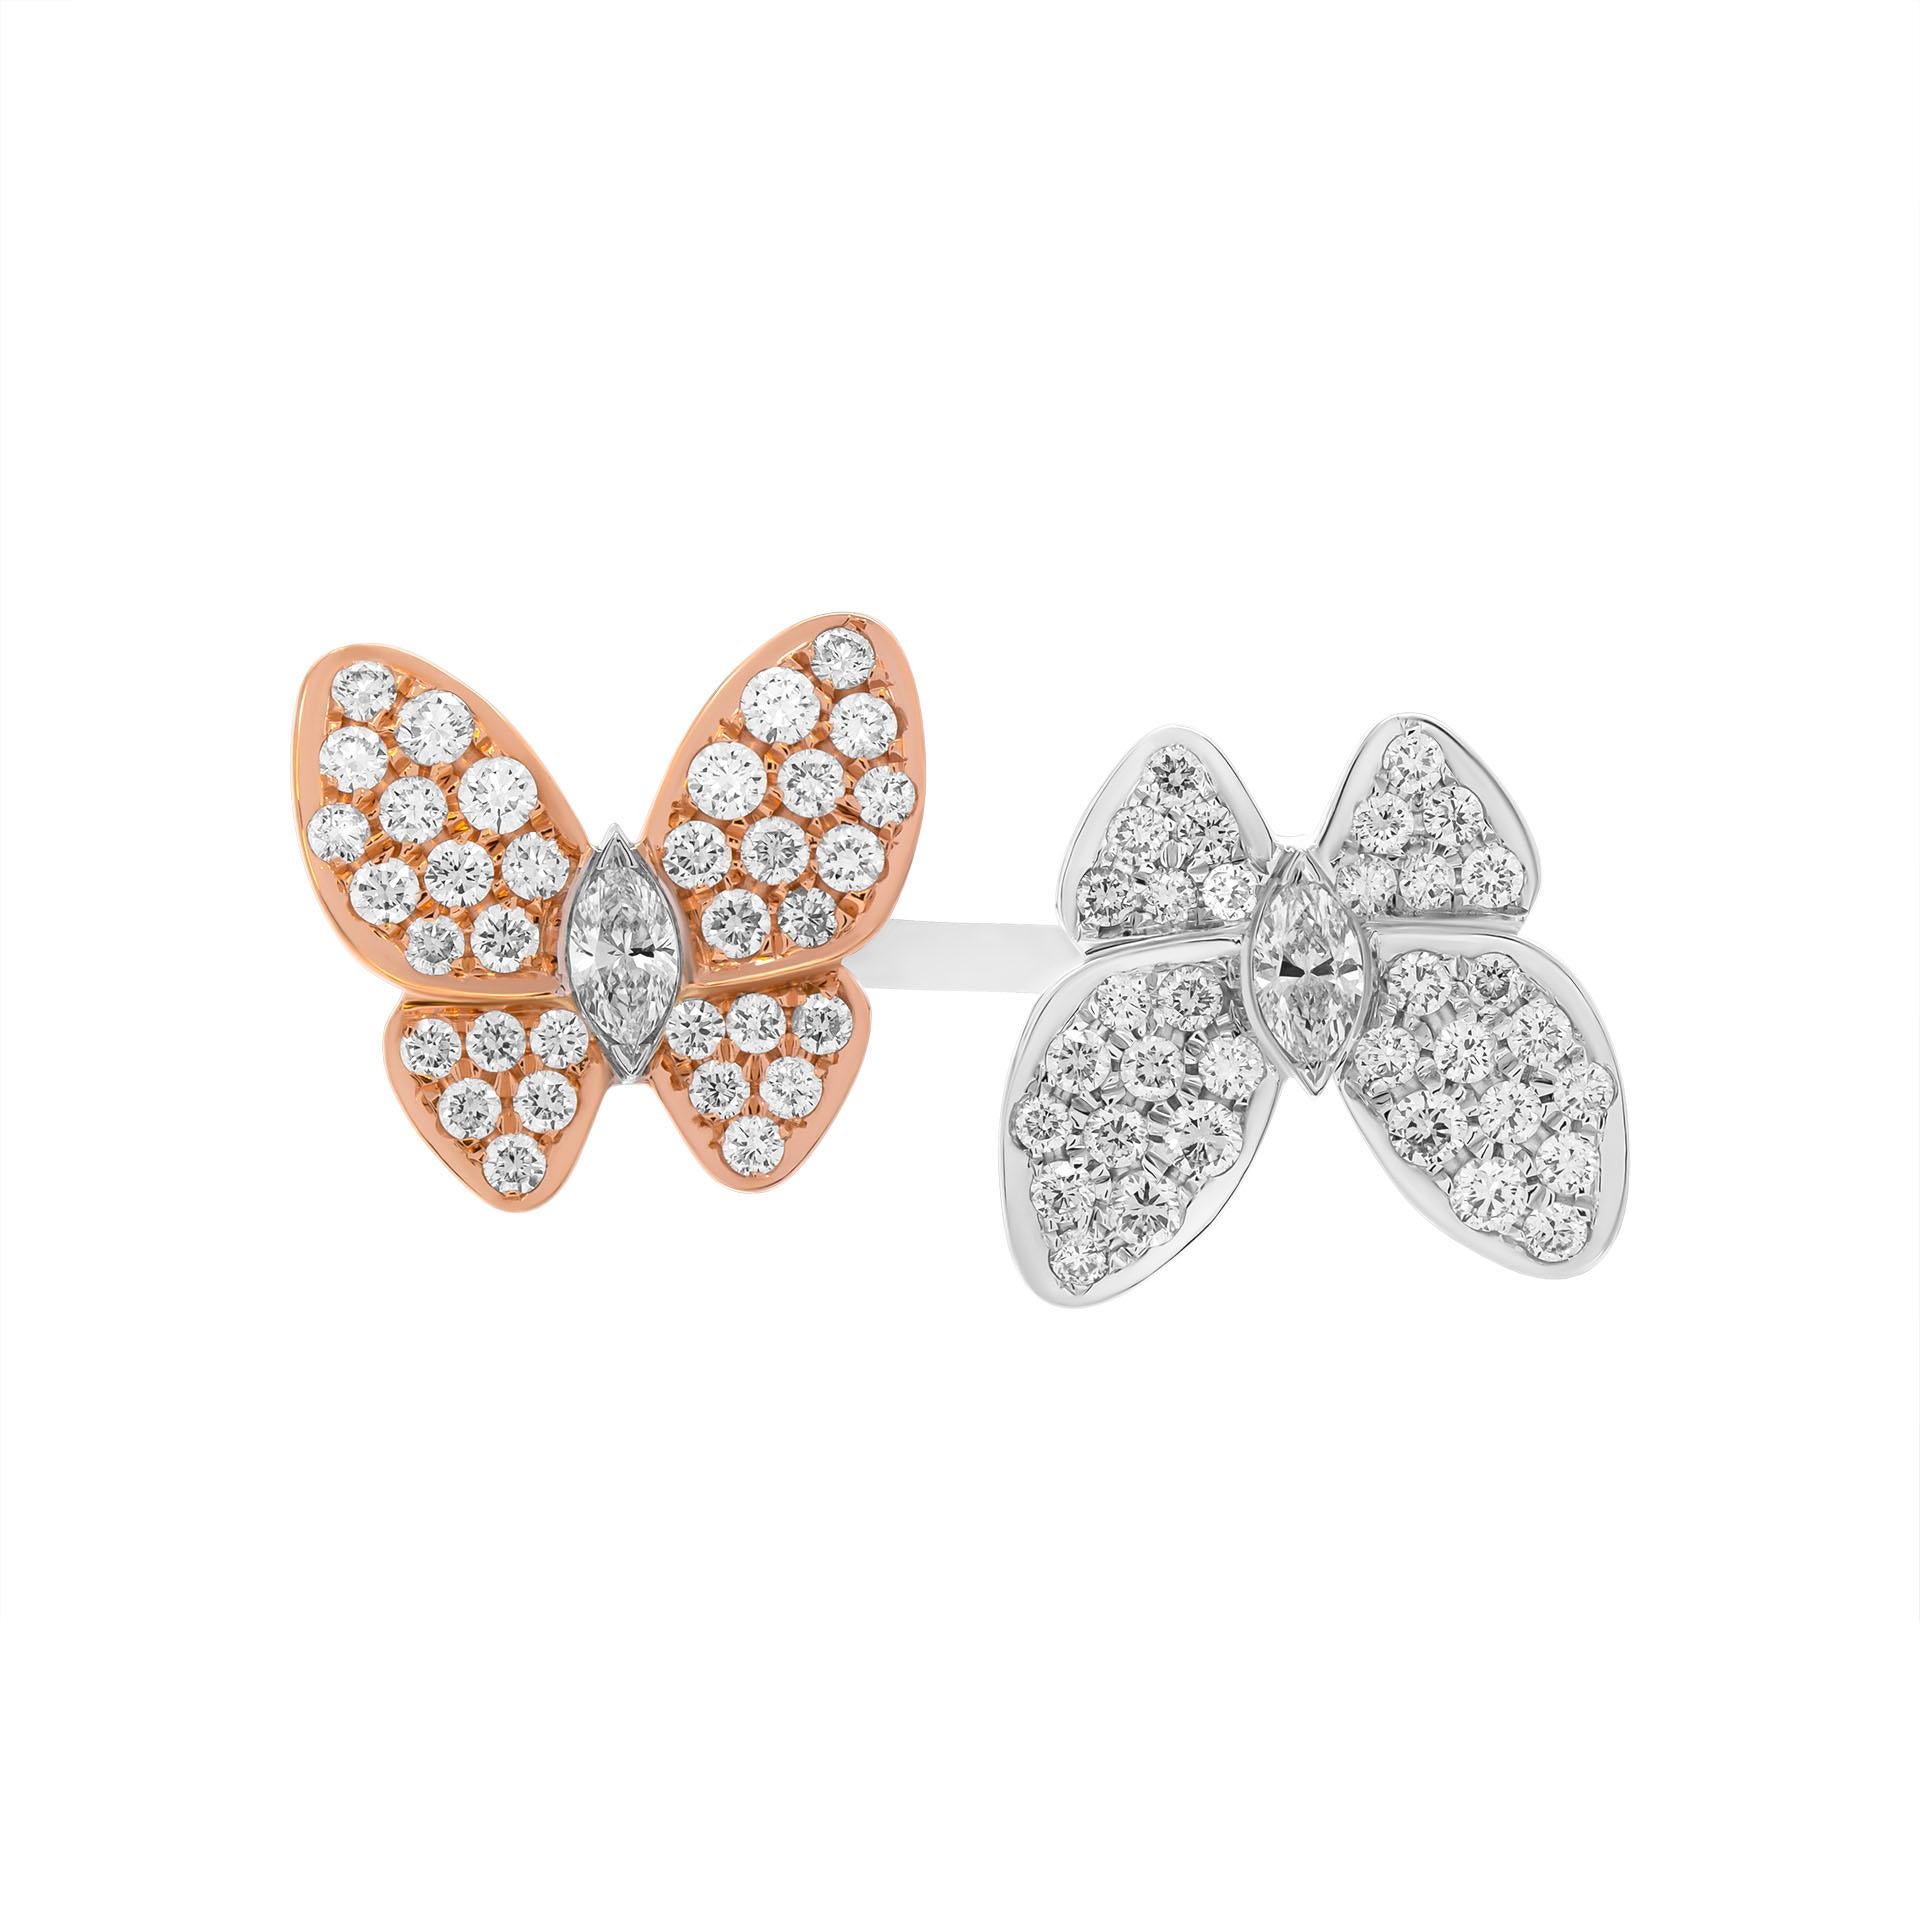 Butterfly ring in 18K White Gold & 18K Rose Gold
Total Carat Weight Of Pave: 1.46ct 
Carat weight of marquee diamonds: 0.47ct 
Size: 7 ¼ (can be sized)
